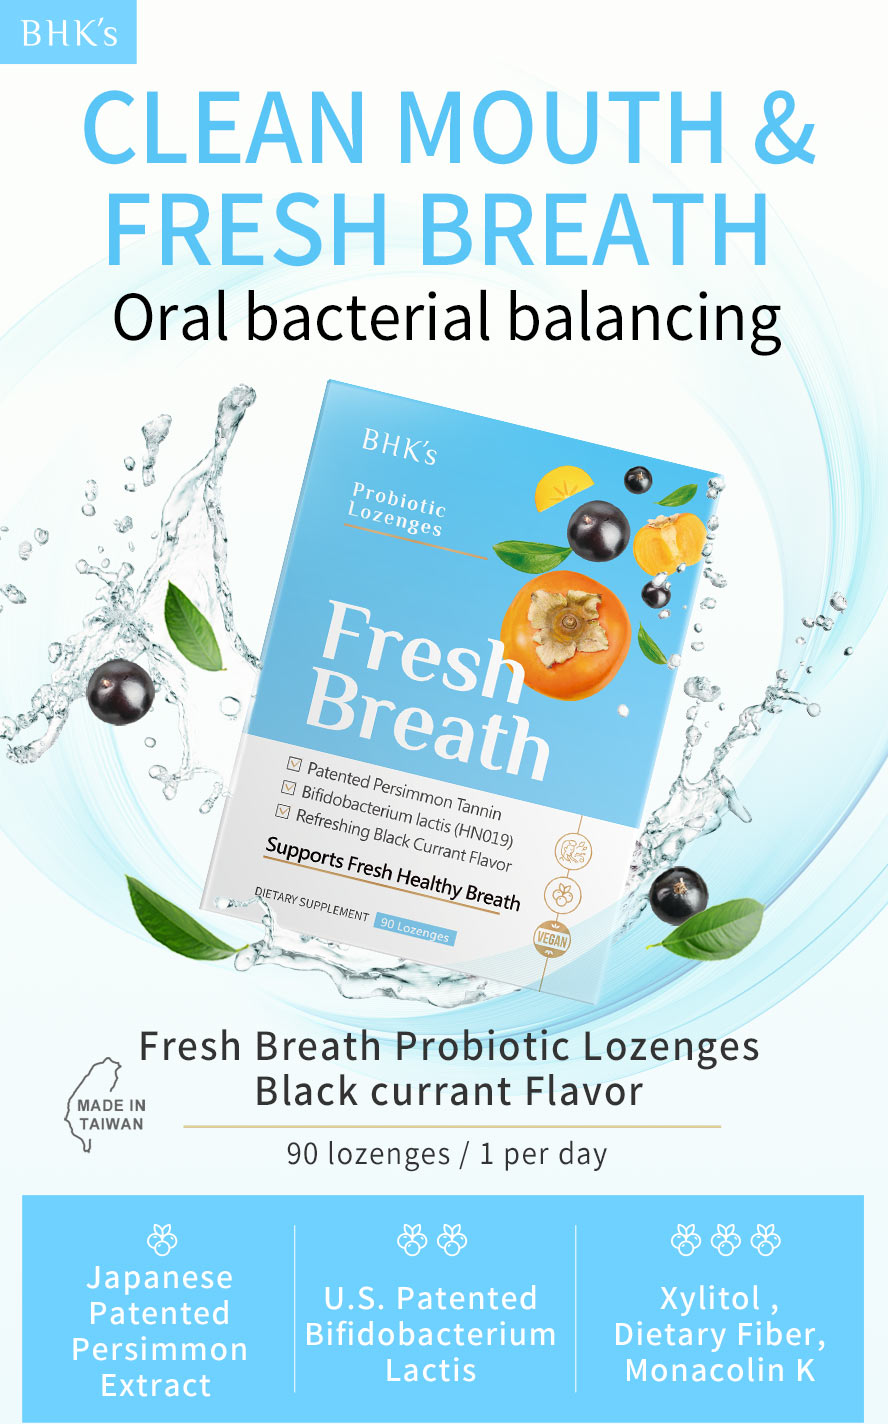 With a blackcurrant flavor, refreshing and cooling sensation. Take one after meal to maintain oral health. 